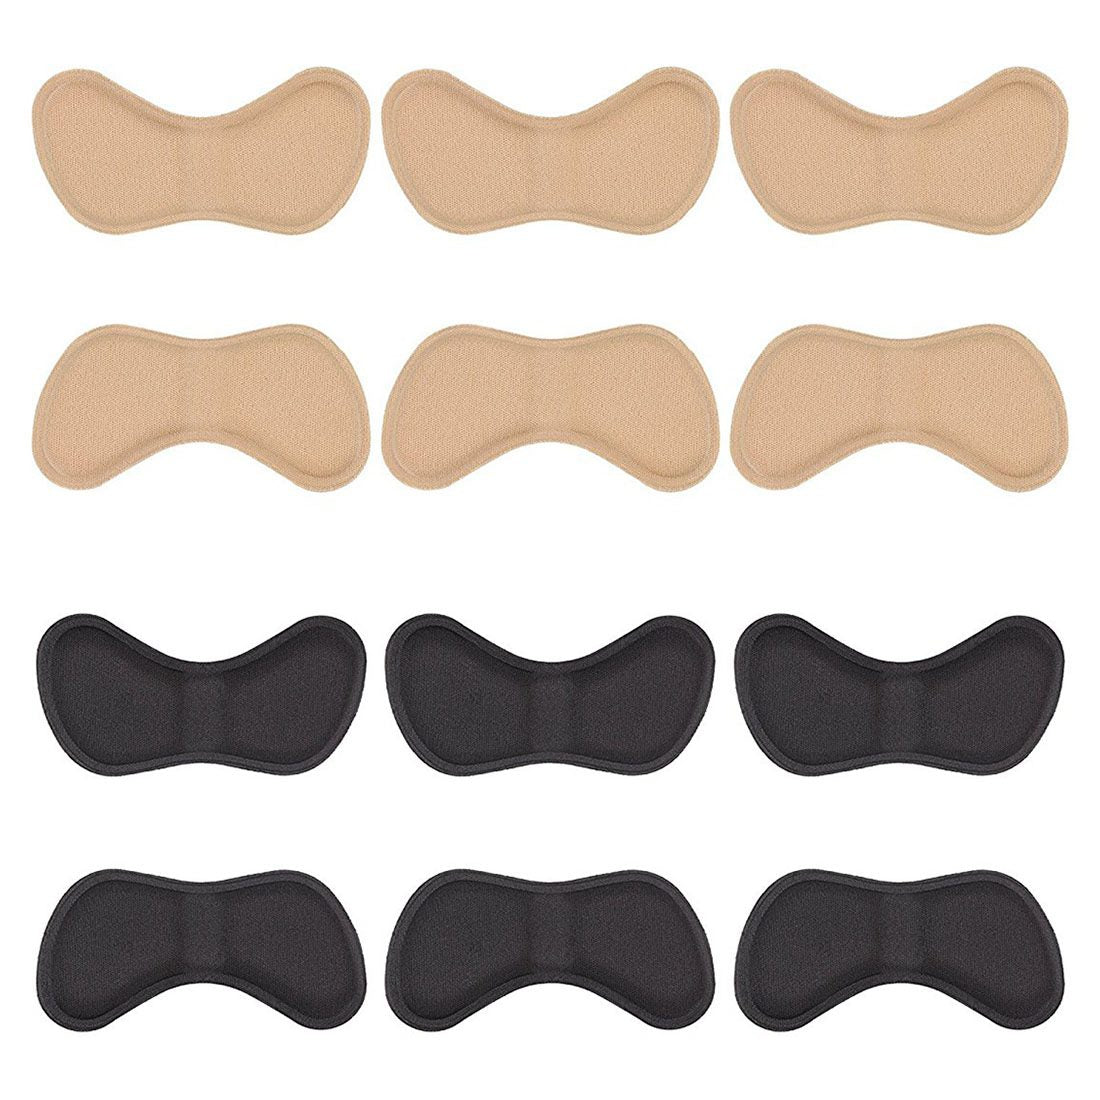 Hot-6 Pairs Heel Stickers Heel Cushion Pads Shoe Heel Insoles for Improved Shoe Fit and Comfort, Black+Beige - ebowsos